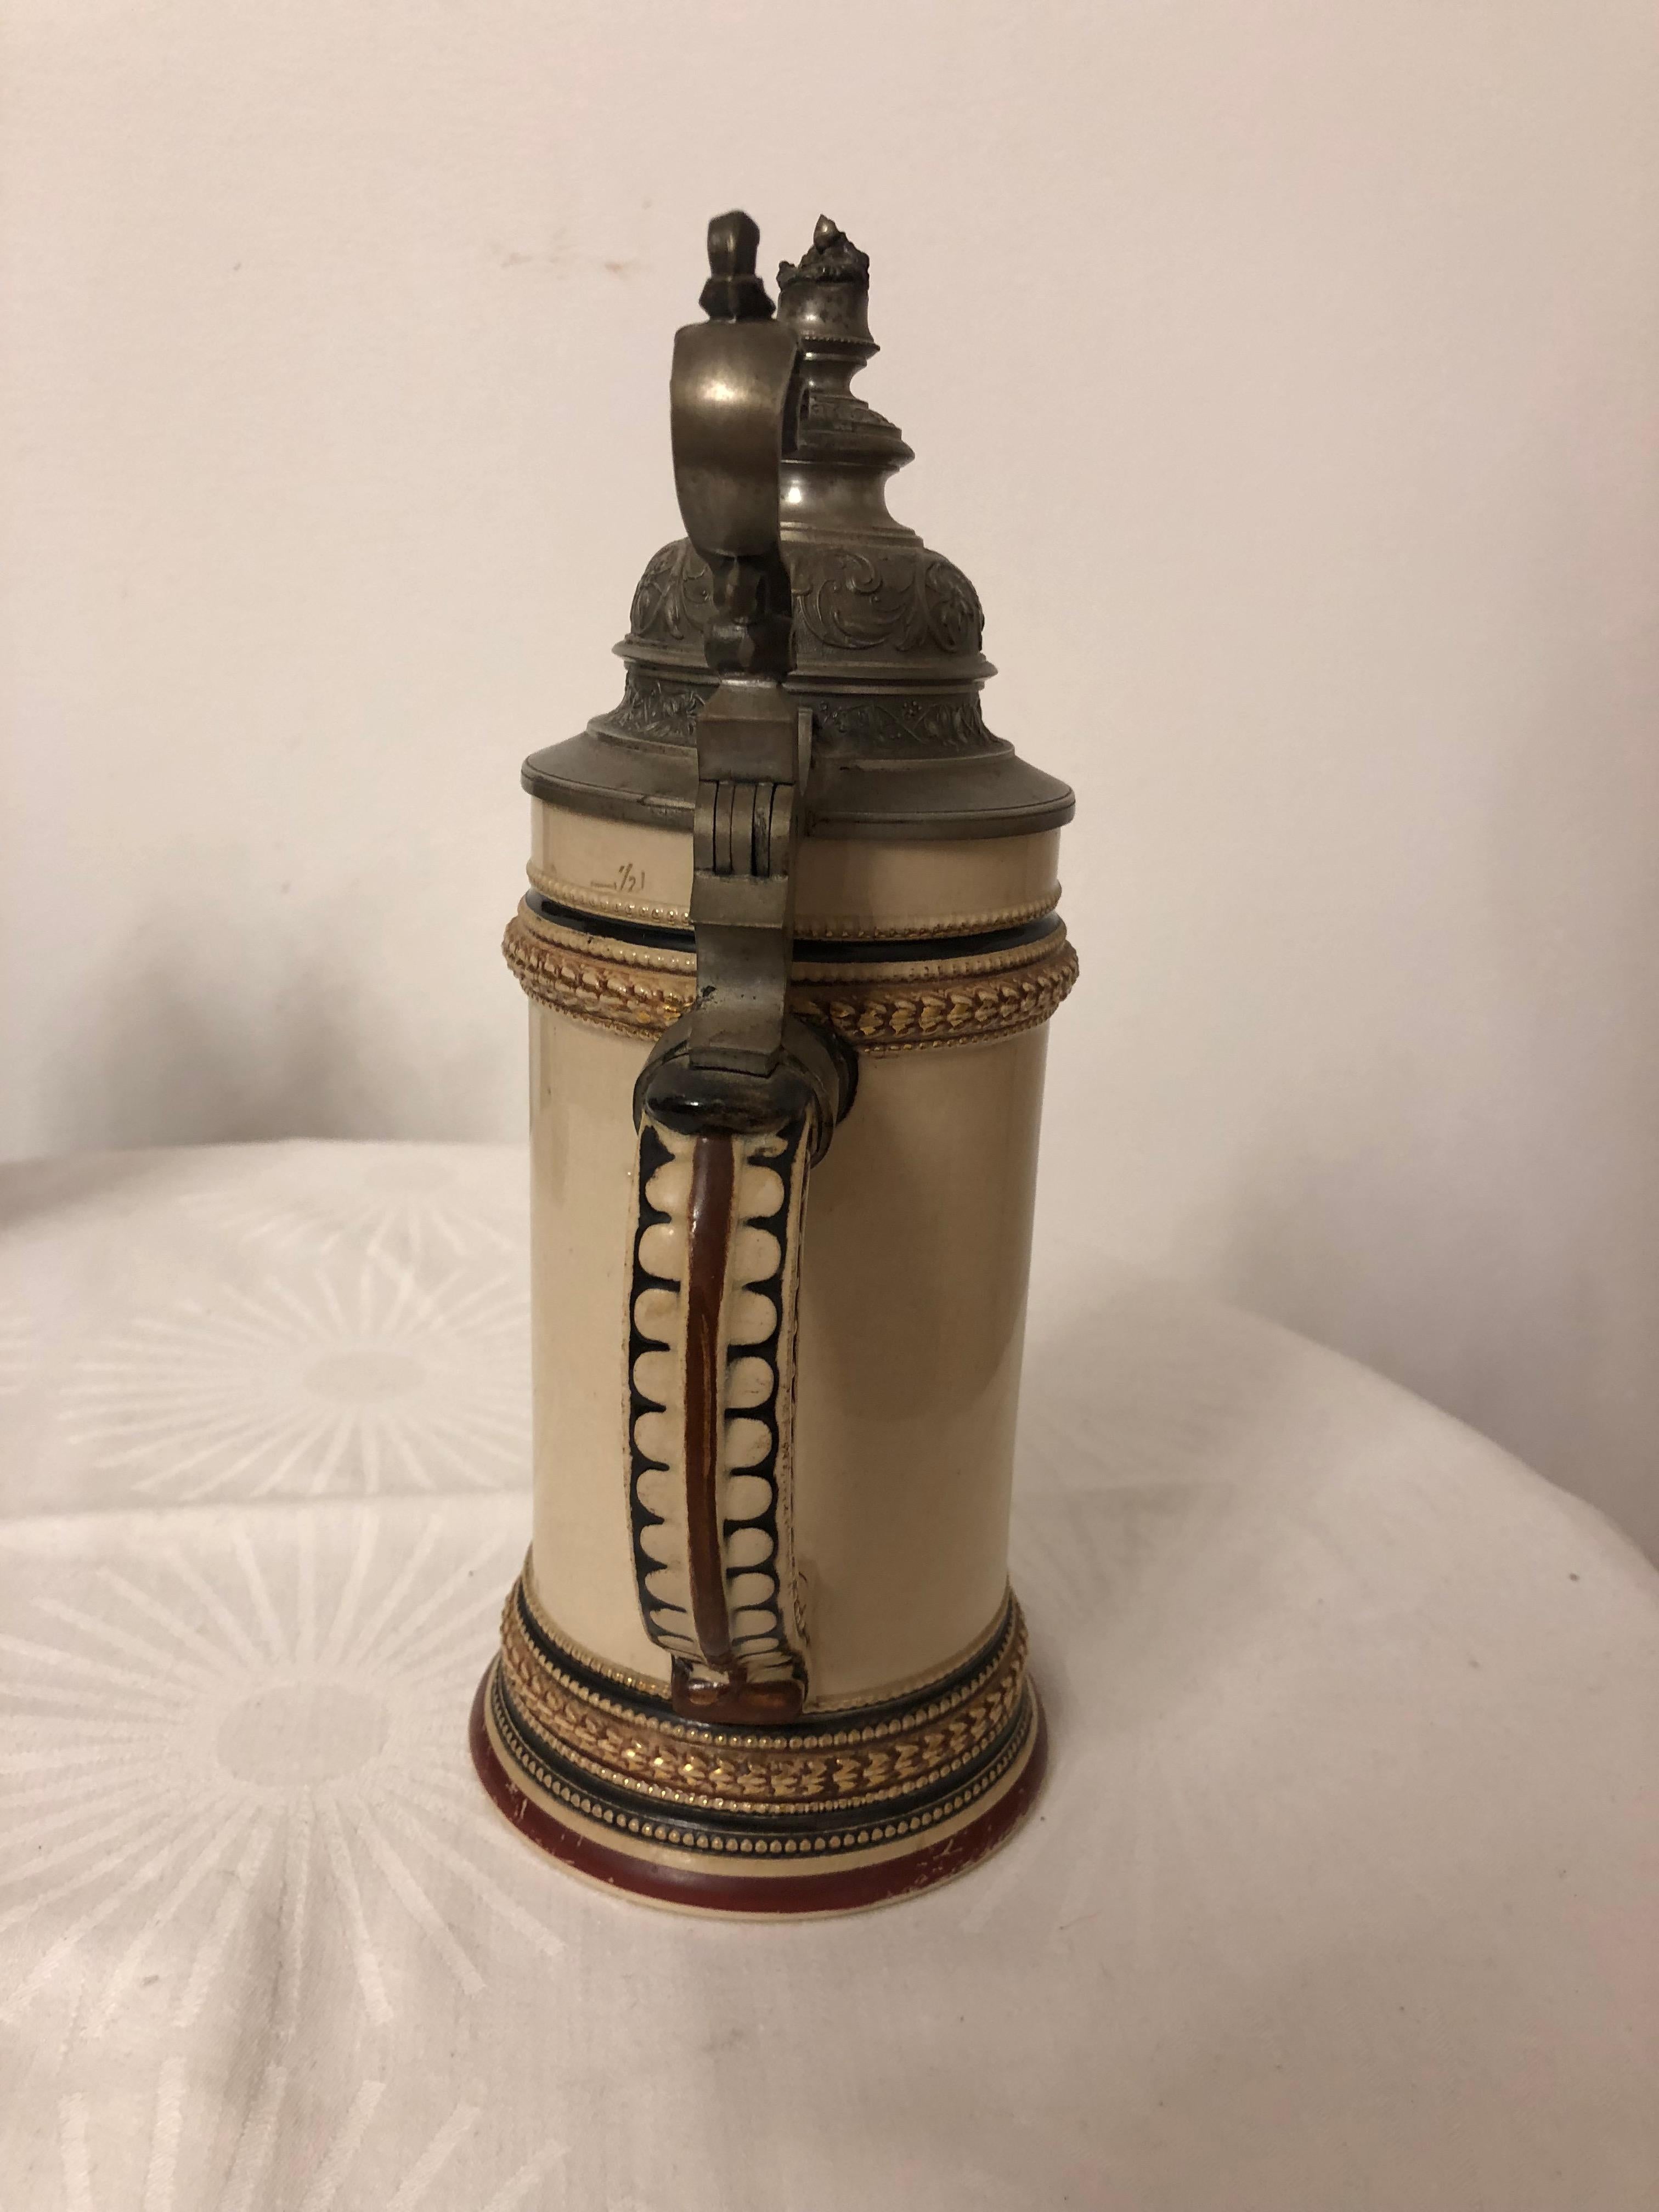 Stoneware 1/2 liter beer stein with an original pewter hinged lid. The body is decorated with a tavern scene.
Made in Germany, circa 1880. Some repairs.